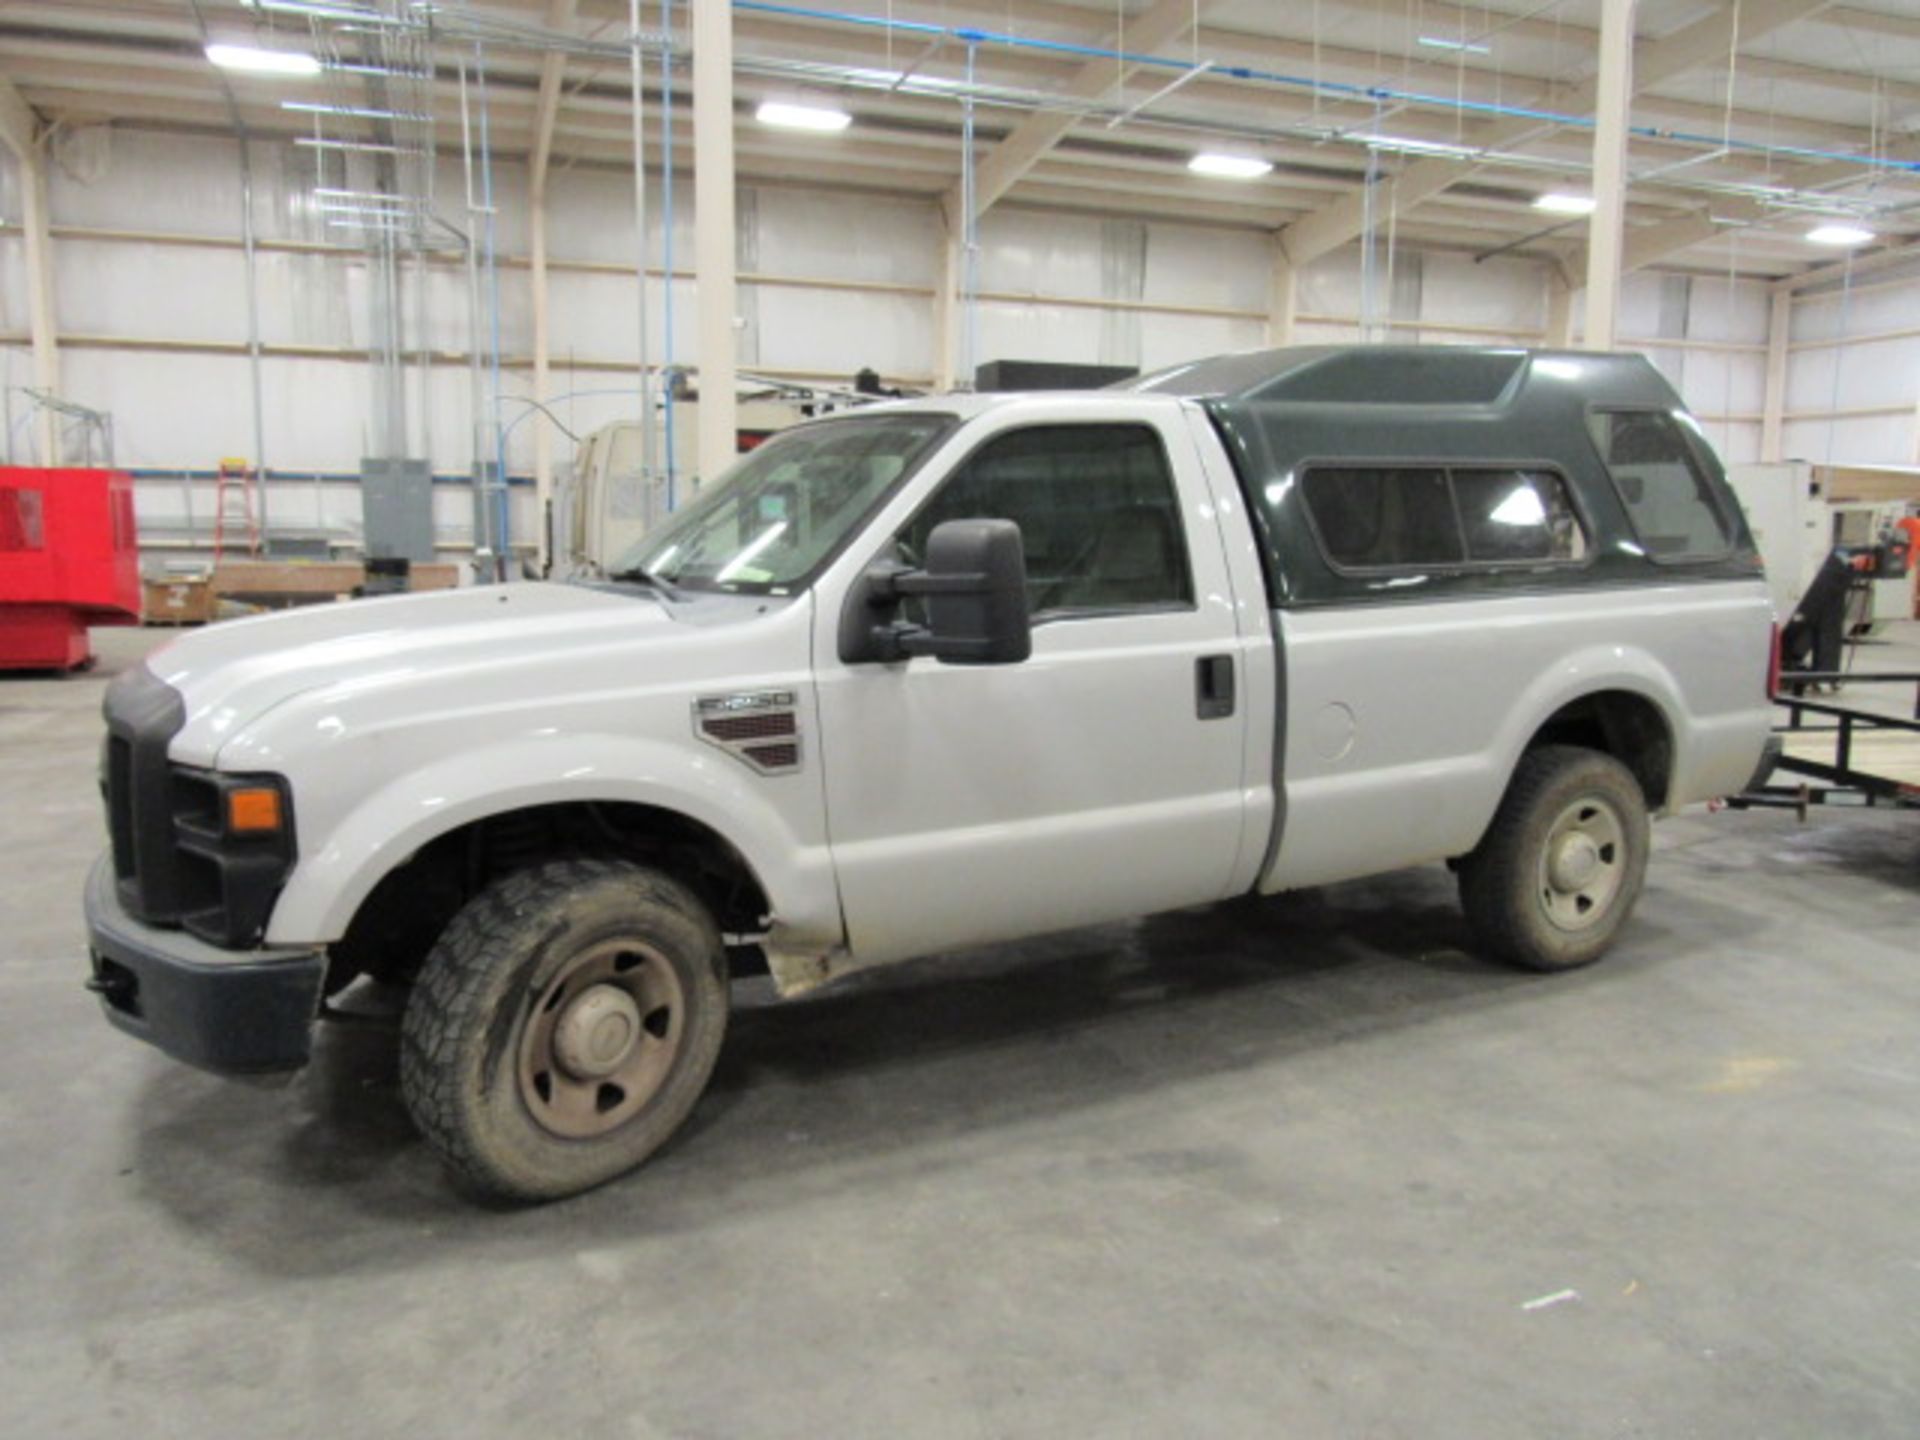 Ford F-250 Automatic Pick-Up Truck with 8' Bed, Air, Bed Shell, Approx 228,000 Miles, mfg.2008 - Image 2 of 8